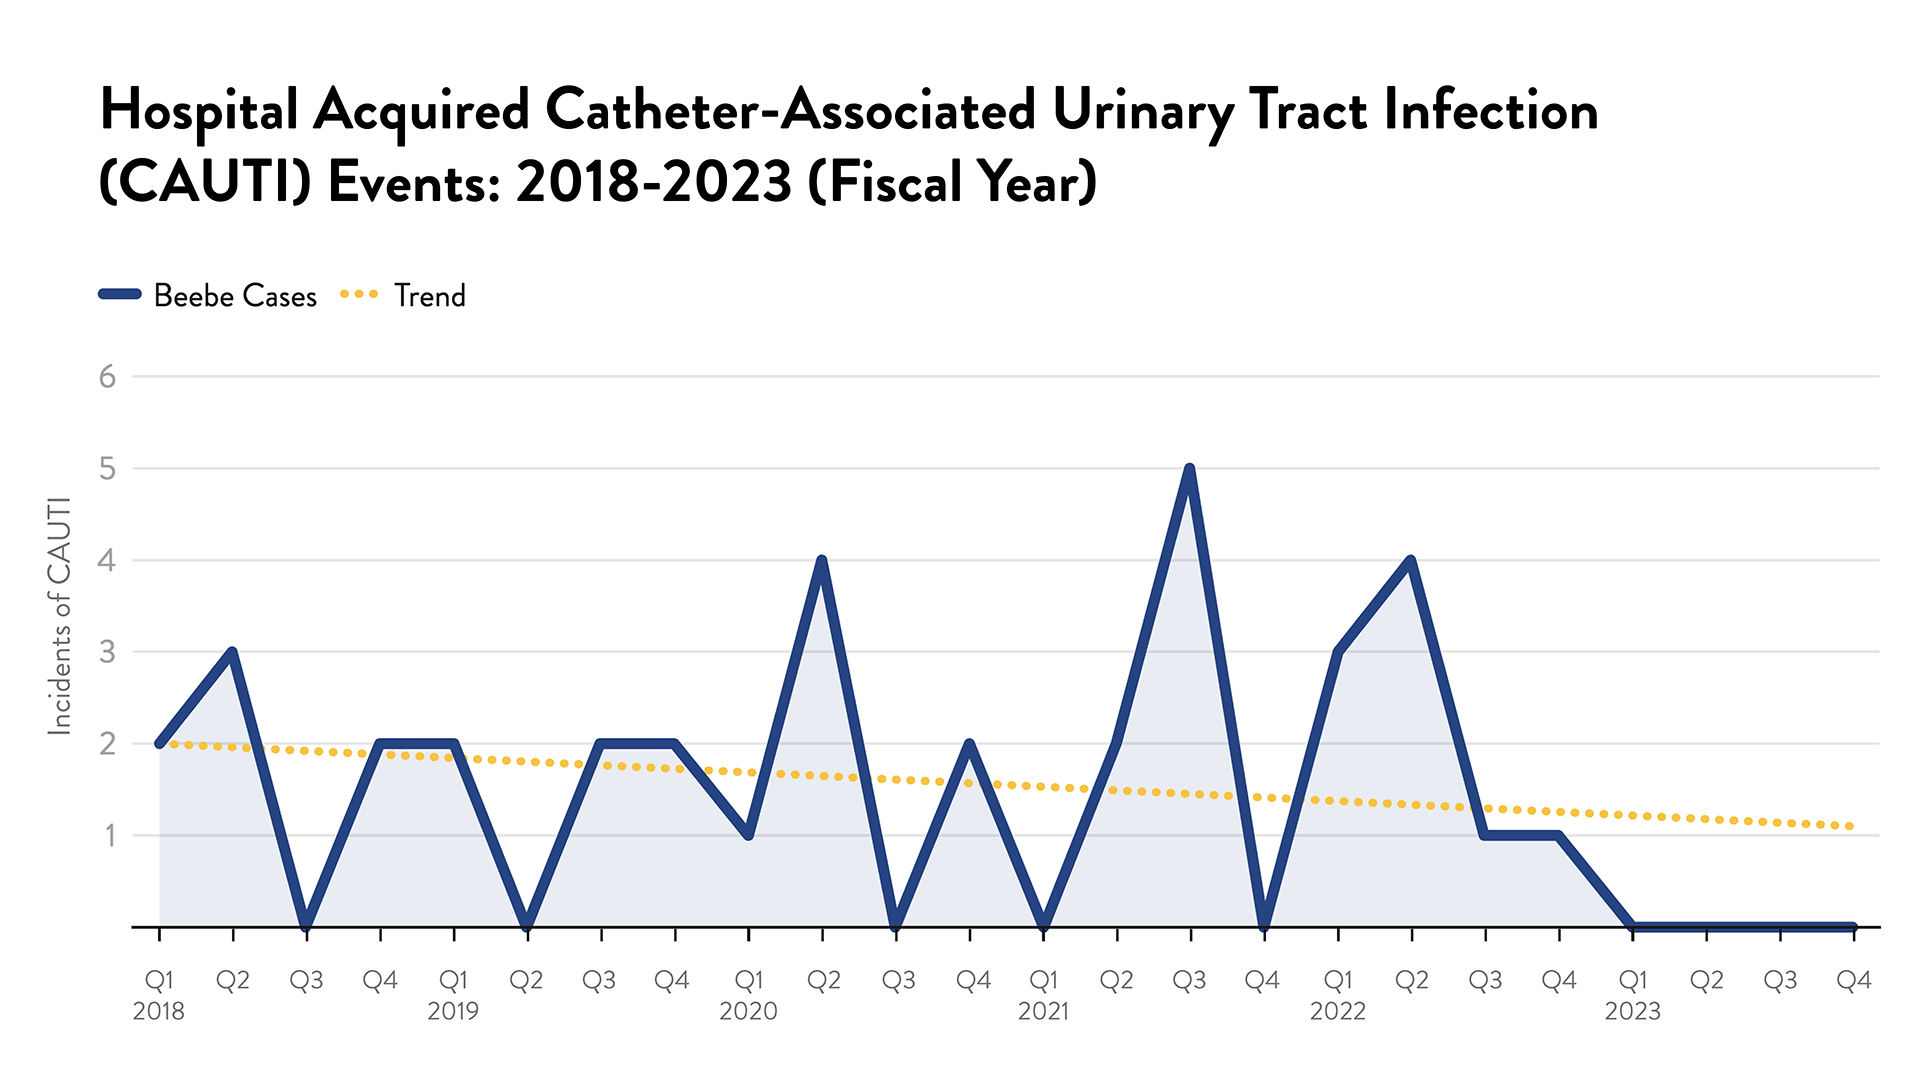 Hospital Acquired Catheter-Associated Urinary Tract Infection (CAUTI) Events: 2018-2023 (fiscal year)